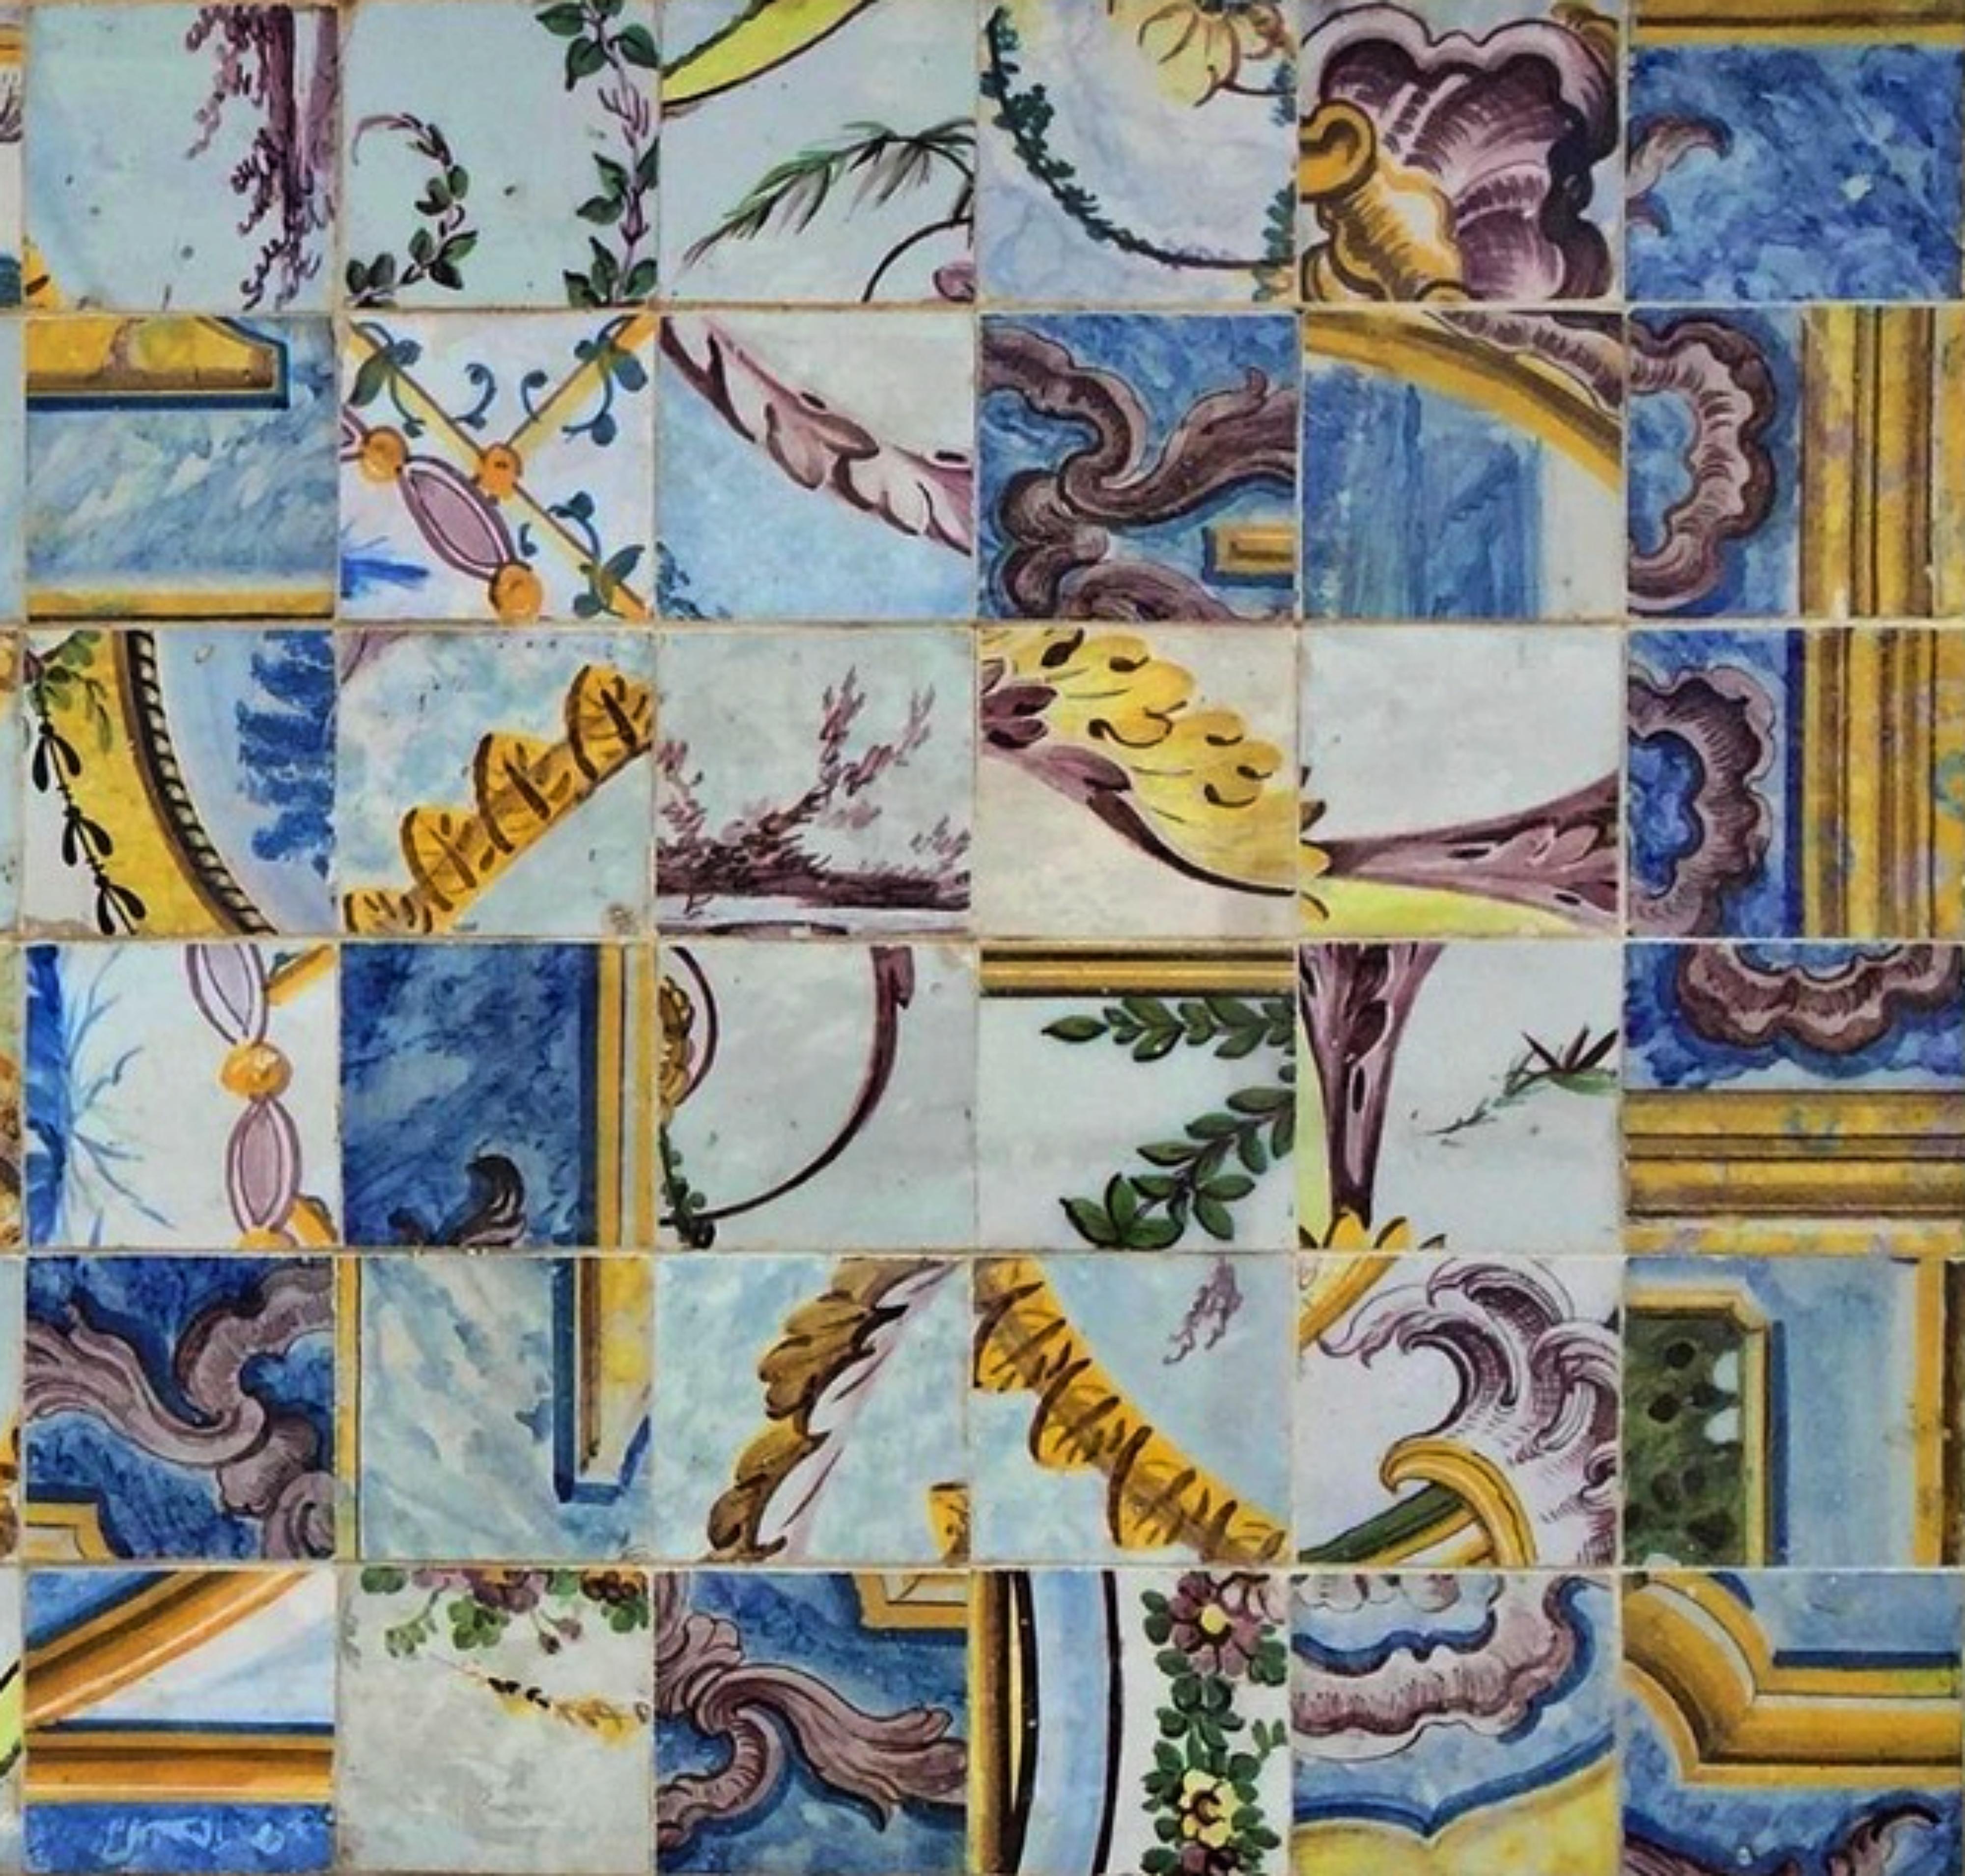 Beautiful 18th century Panel Loose Pieces Portuguese Tiles
1.93 x 0.83m
84 tiles
good conditions